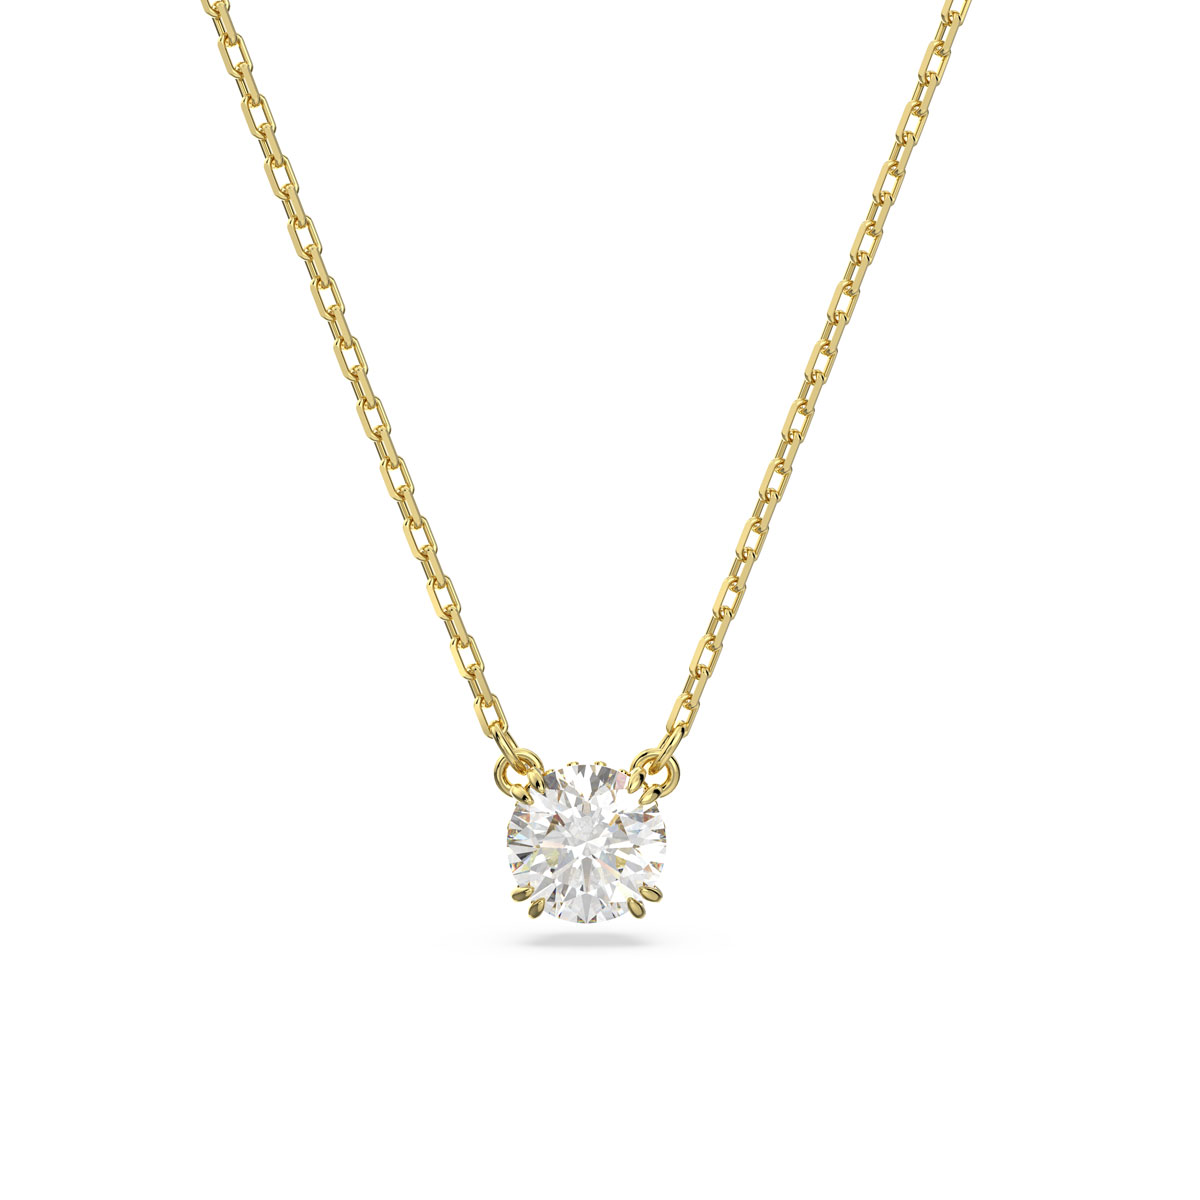 Swarovski Constella Round Cut Crystal and Gold Pendant Necklace